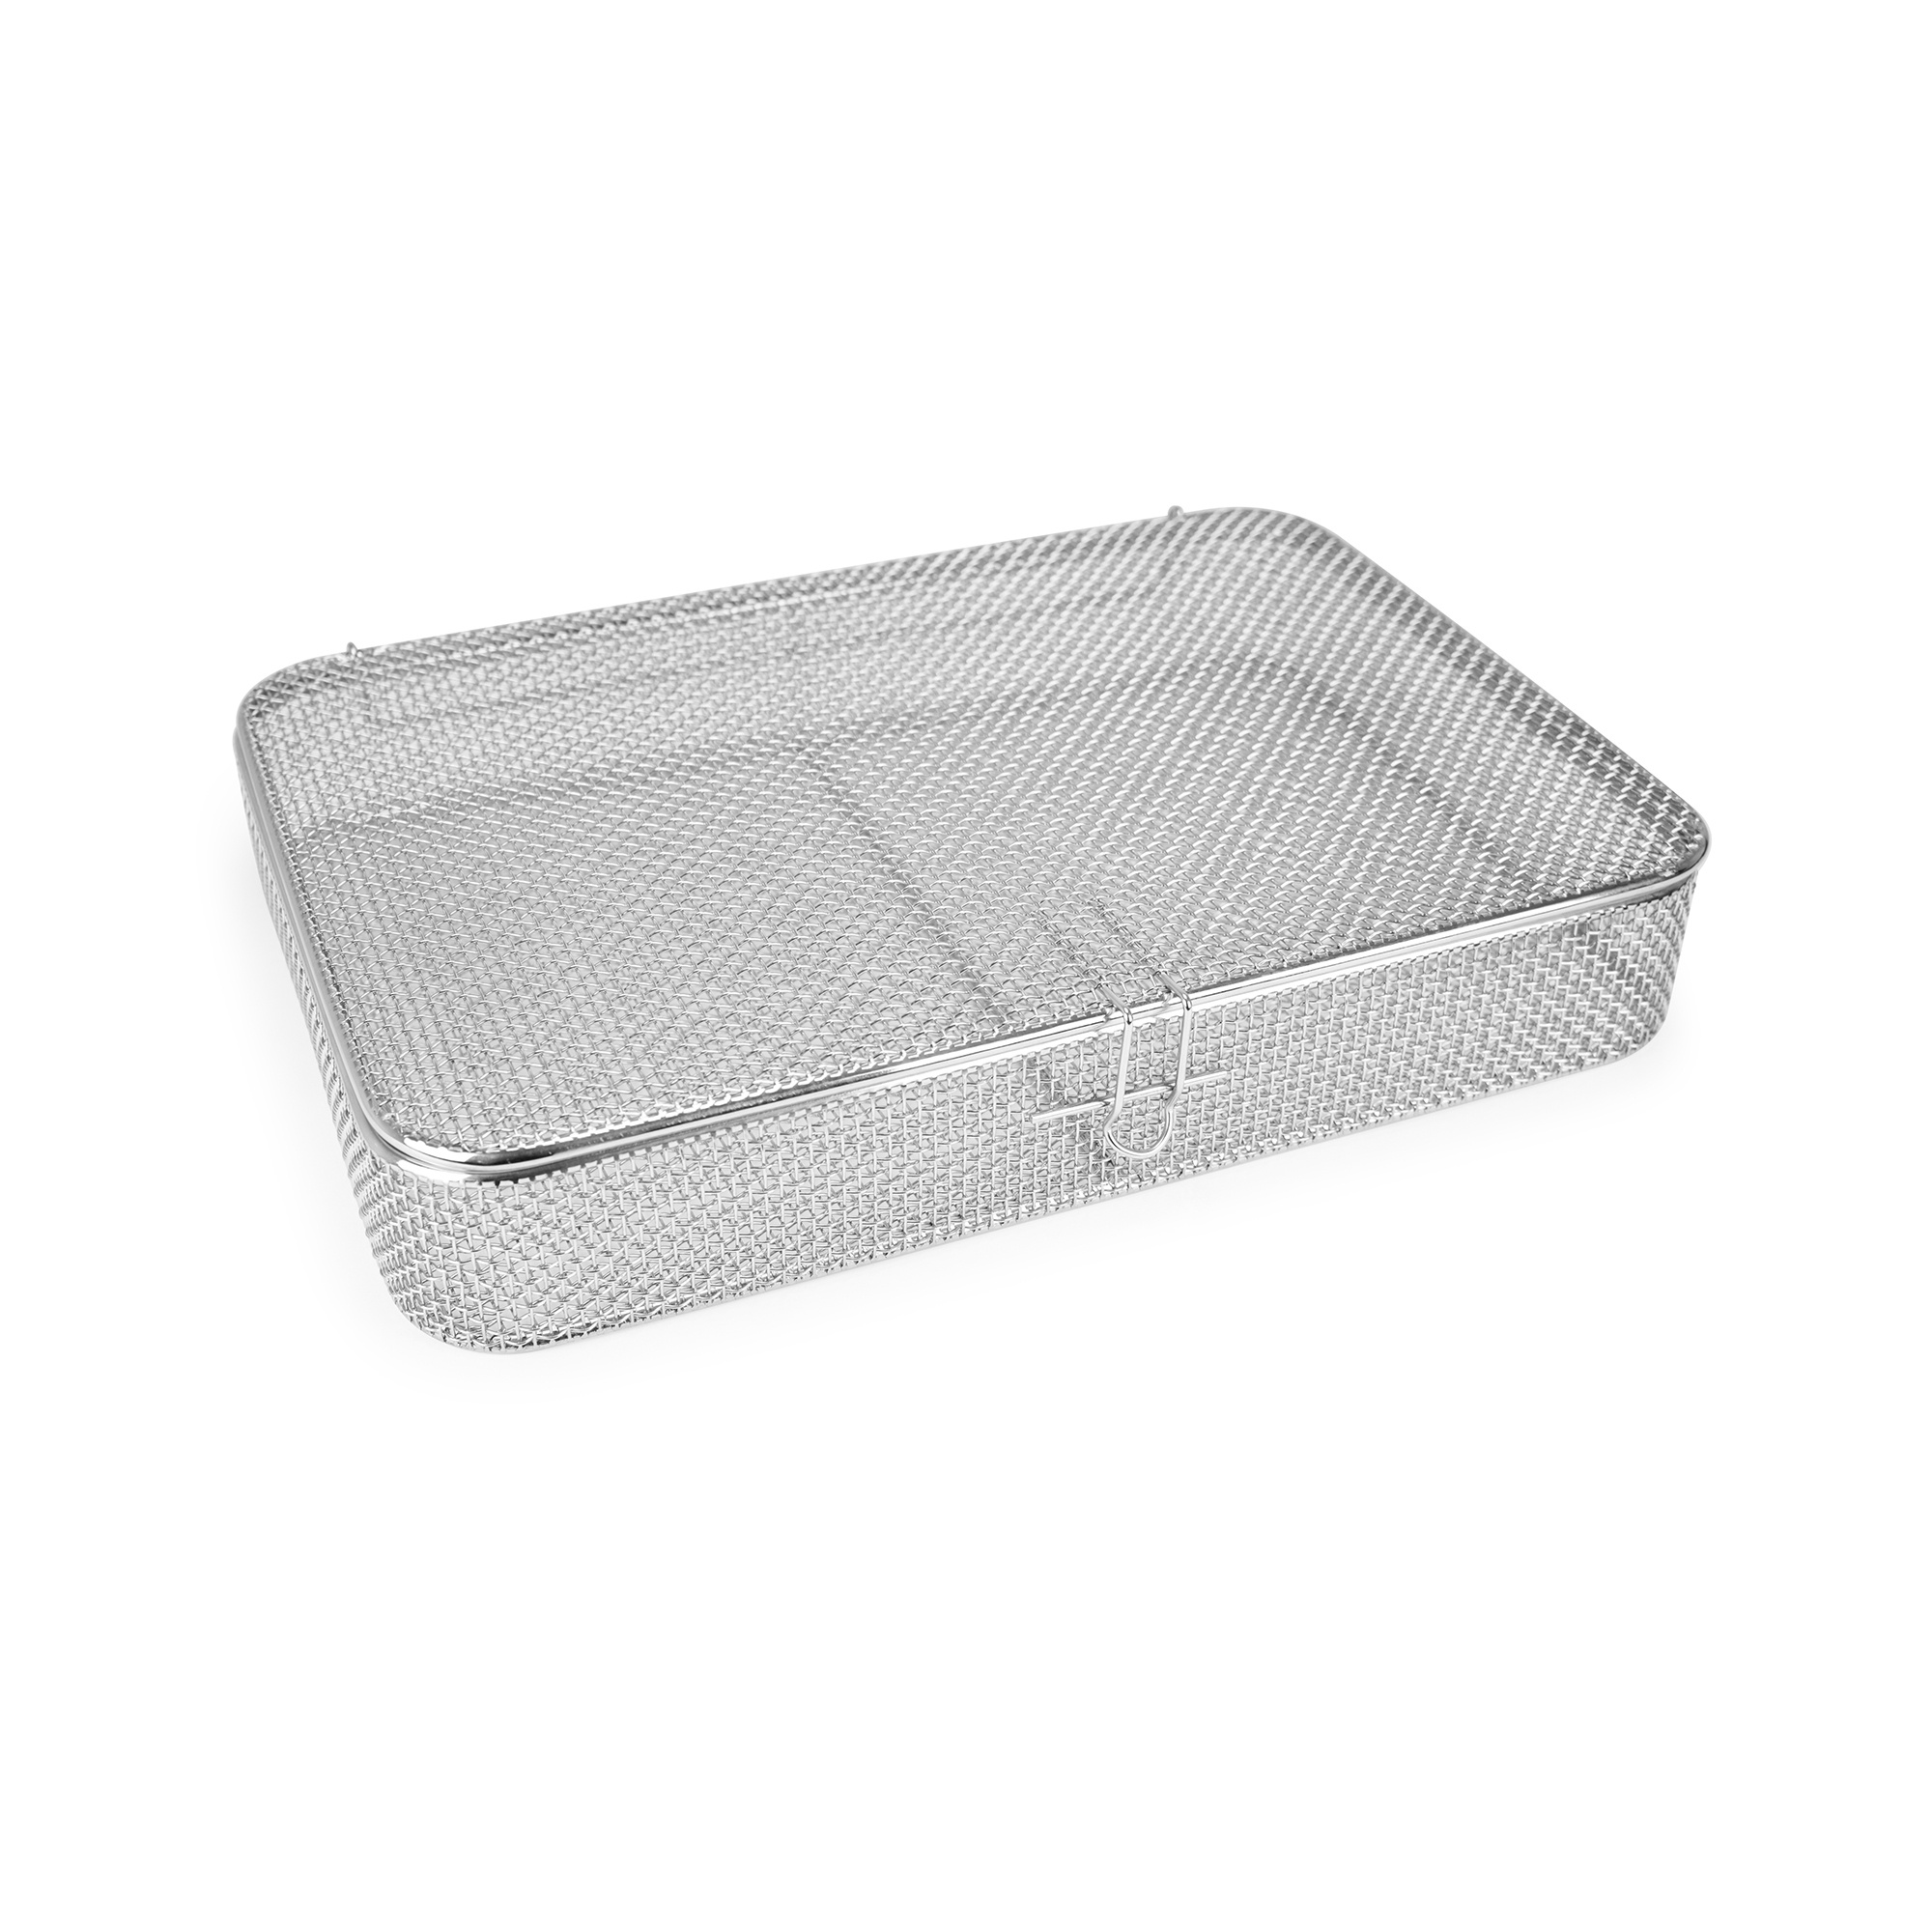 Sieve tray with lid Image